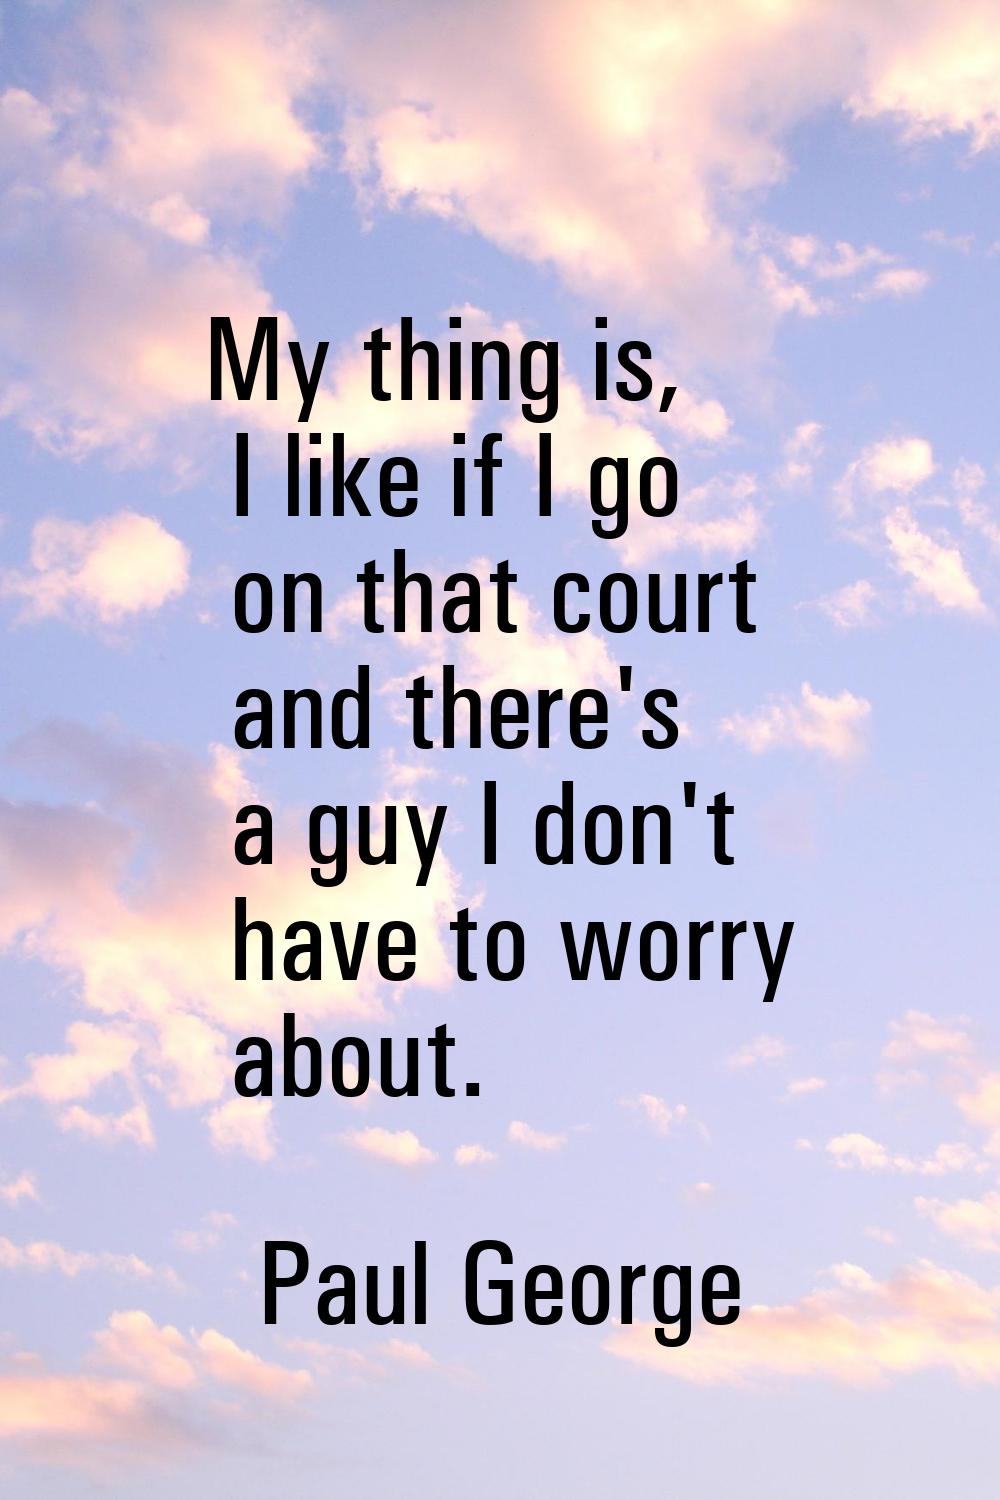 My thing is, I like if I go on that court and there's a guy I don't have to worry about.